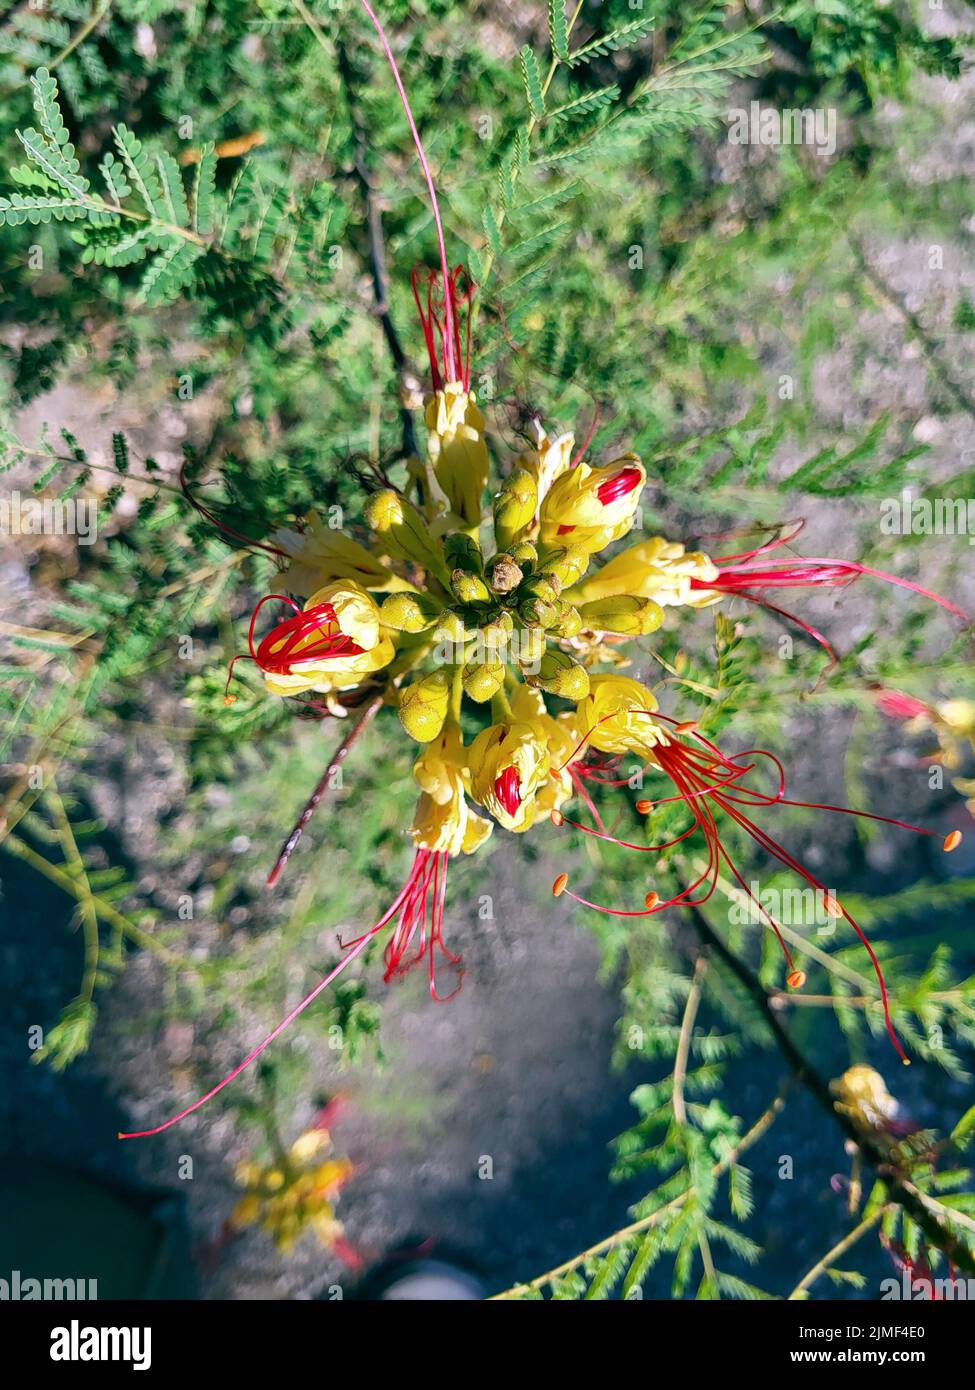 Greece, blossom of yellow peacock flower Stock Photo